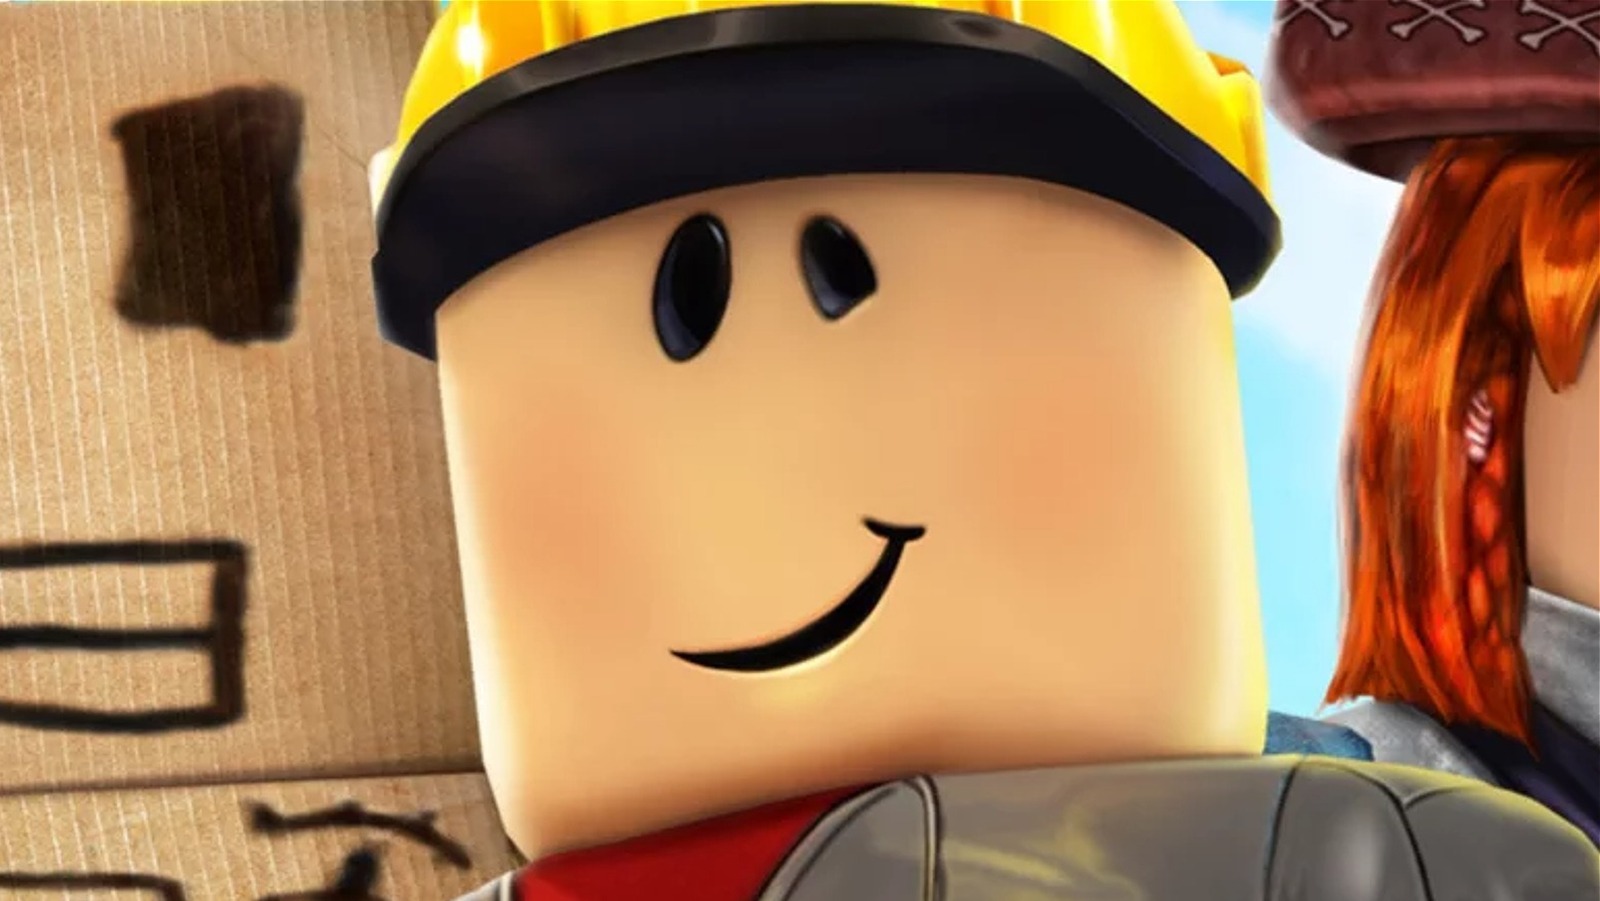 Some games I recommend if you are bored : r/roblox